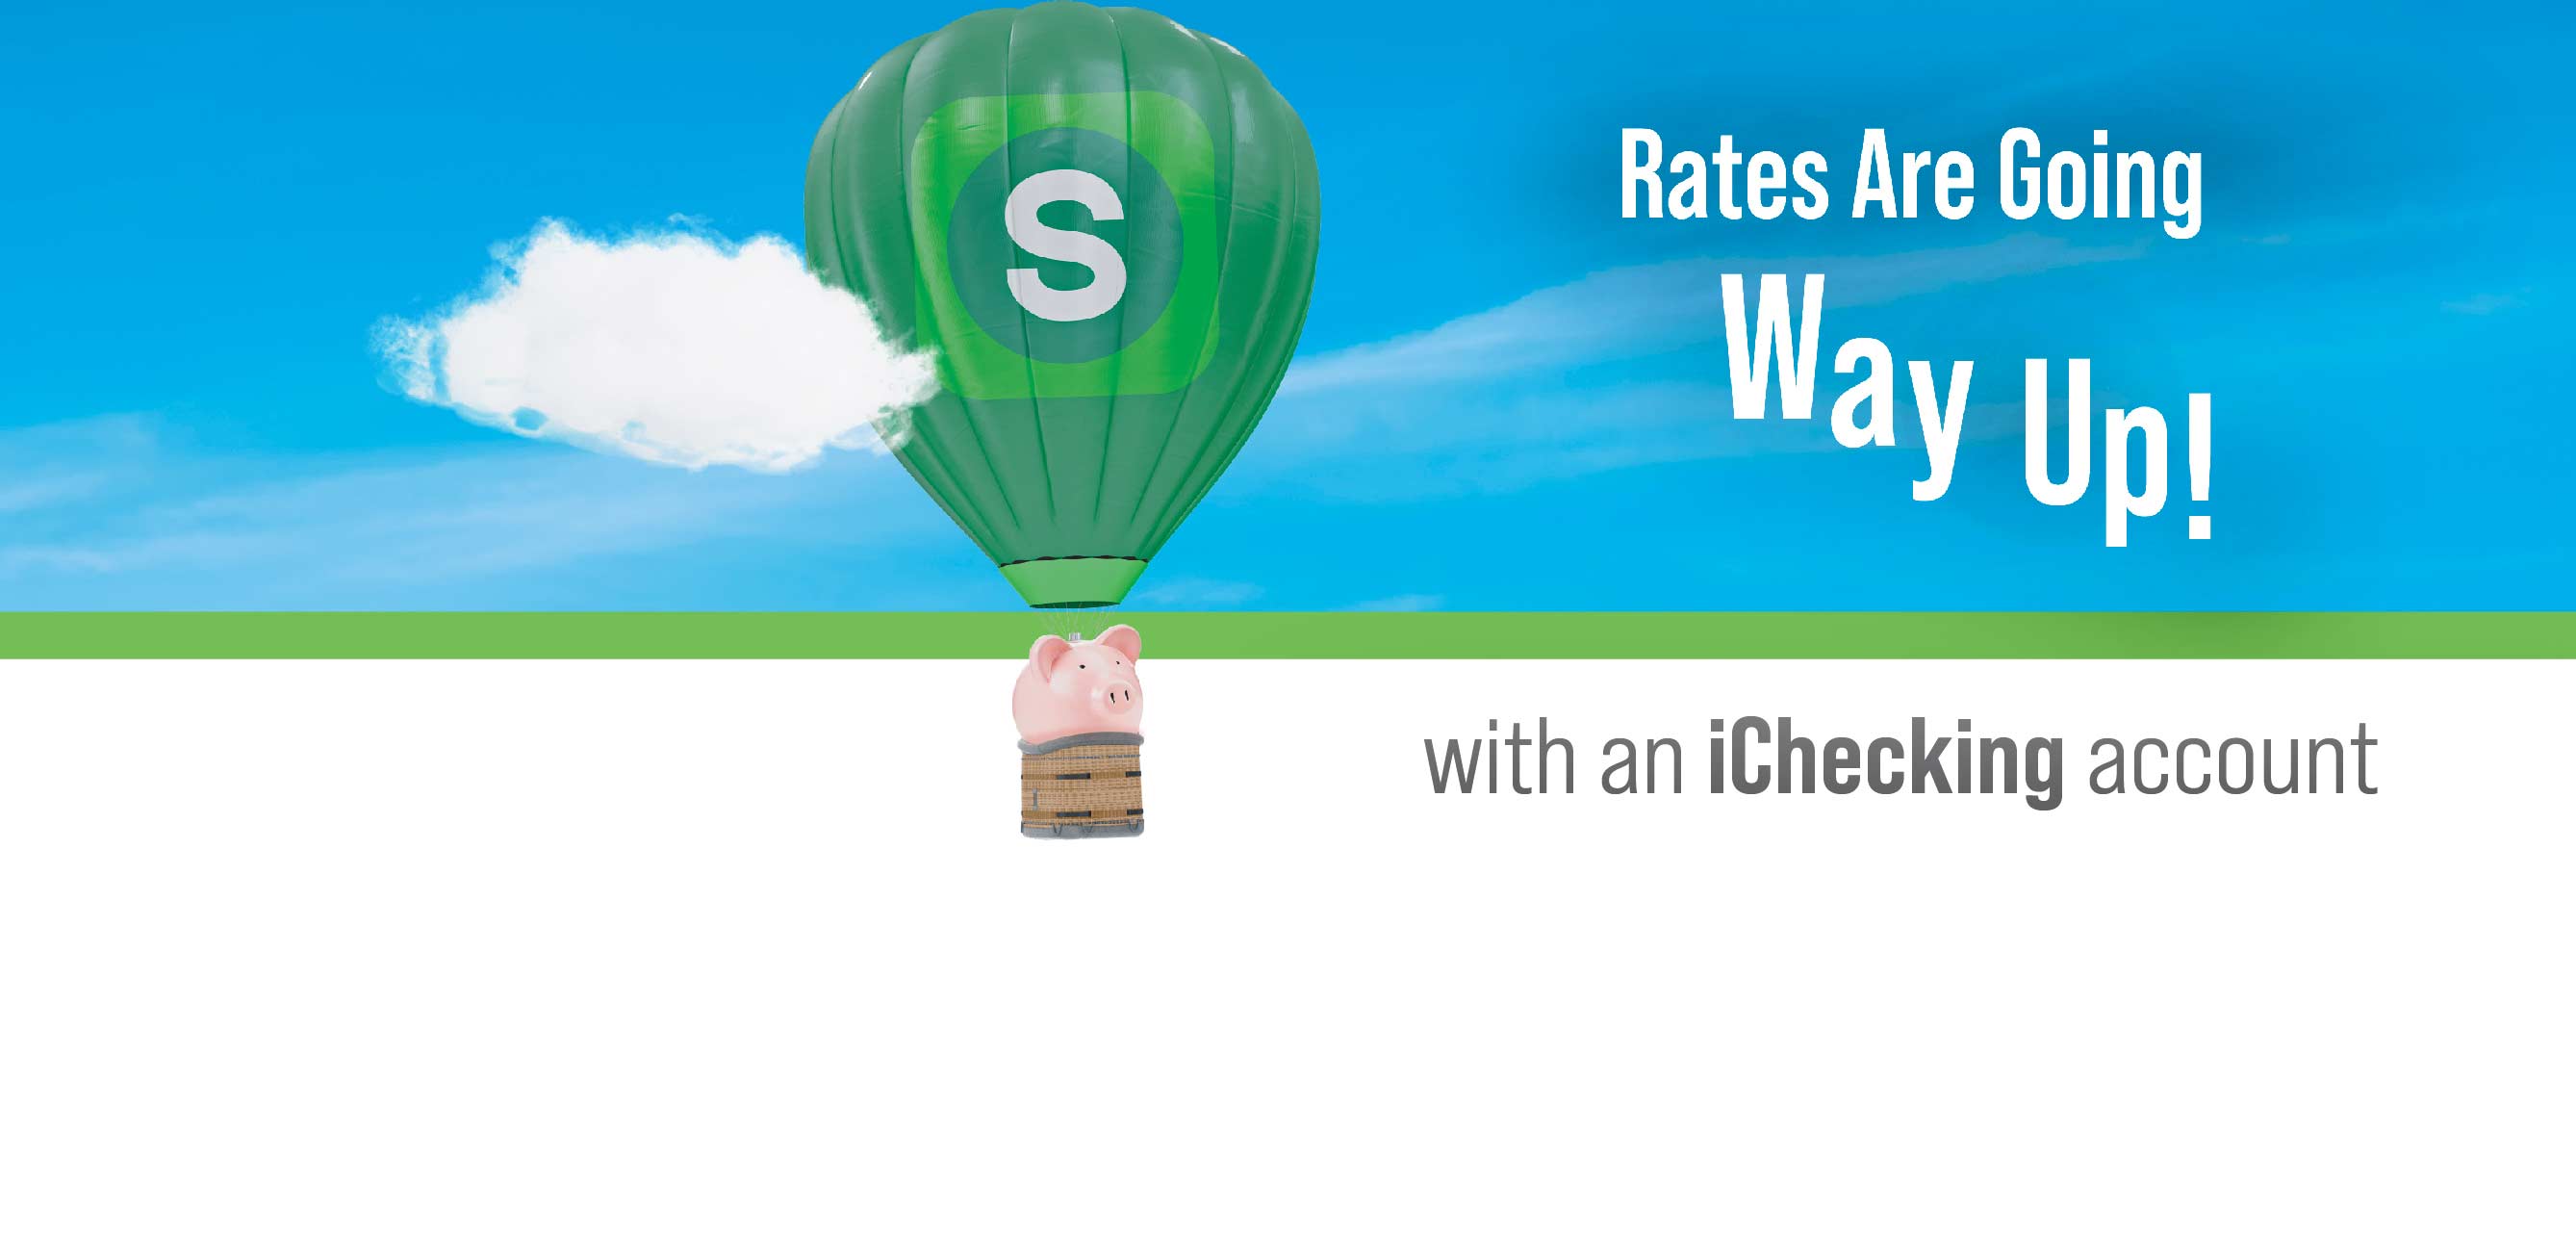 Rates are going way up with an iChecking Account.